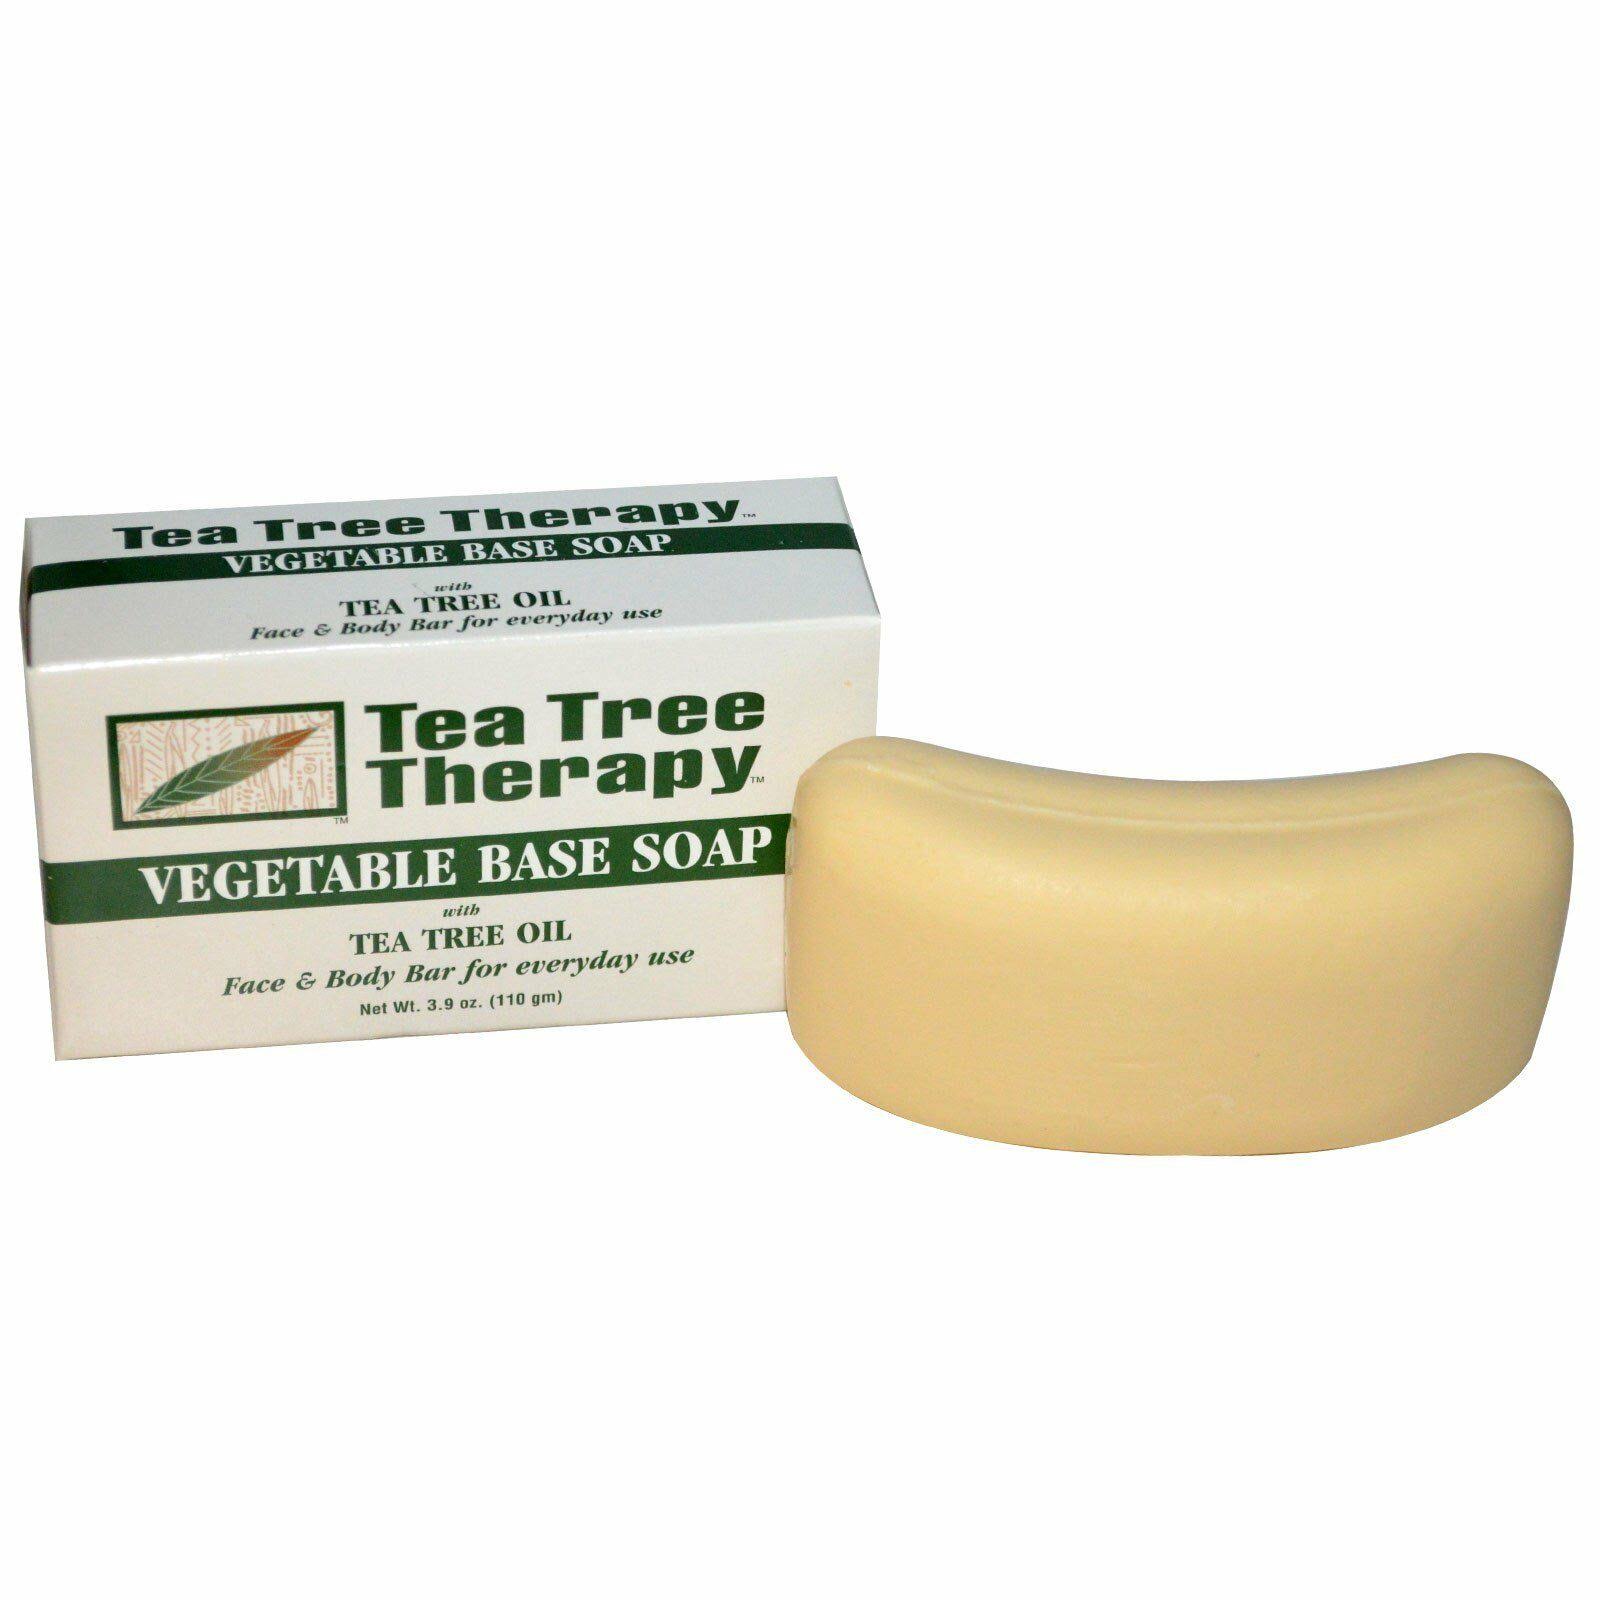 Tea Tree Therapy Vegetable Soap